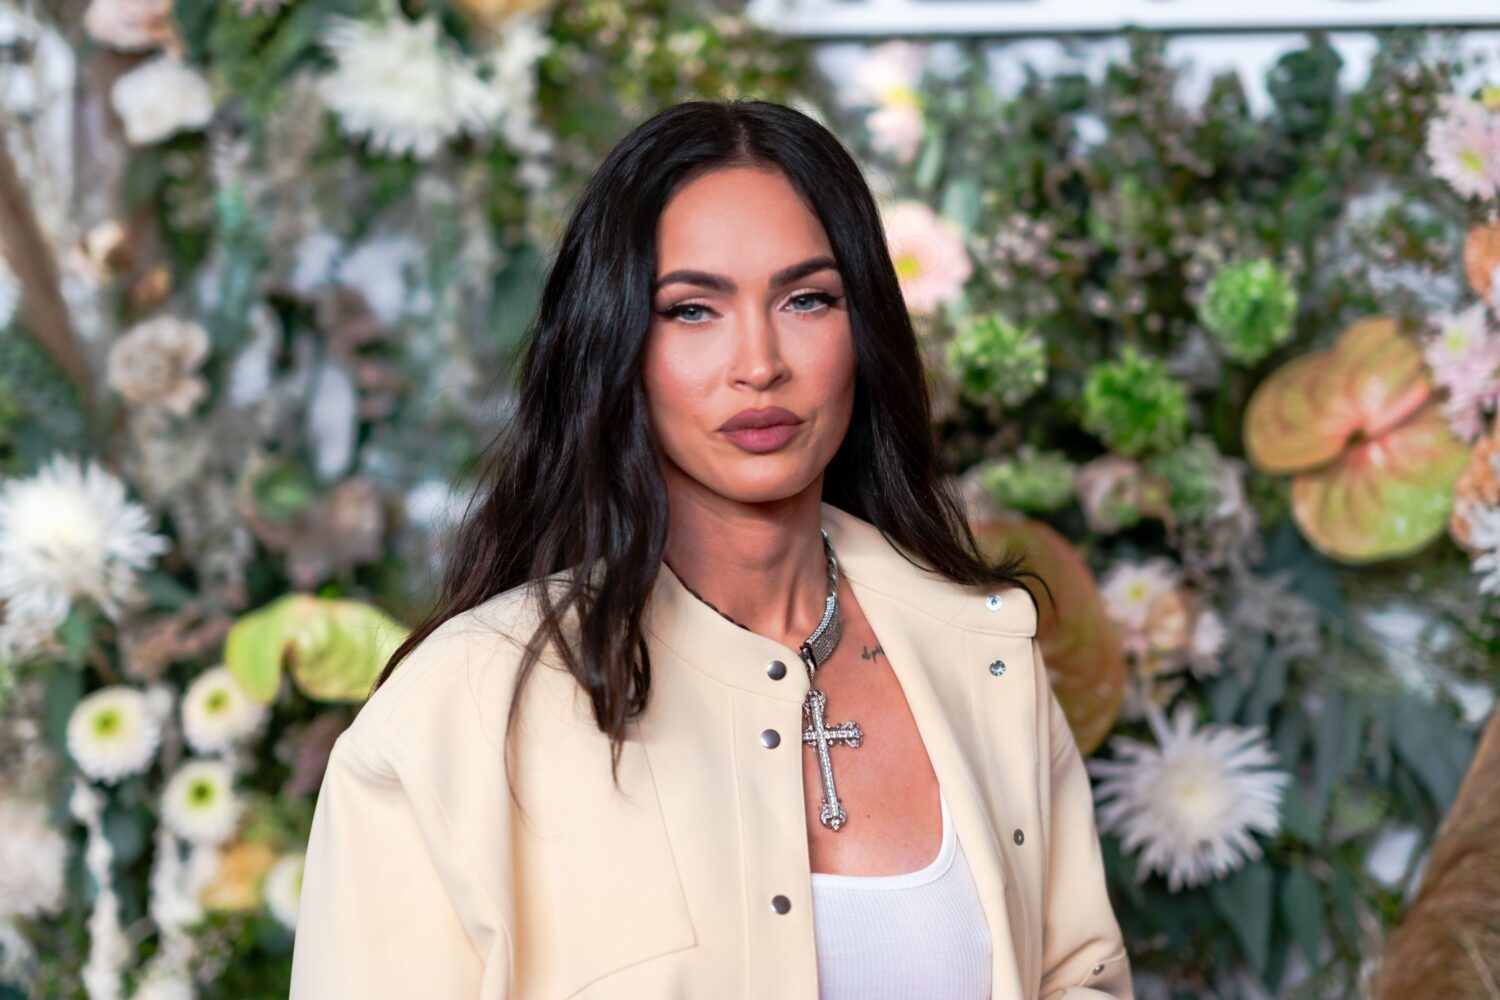 Megan Fox Fires Back At Robby Starbuck Over Comments On Her Kids' Gender Identity